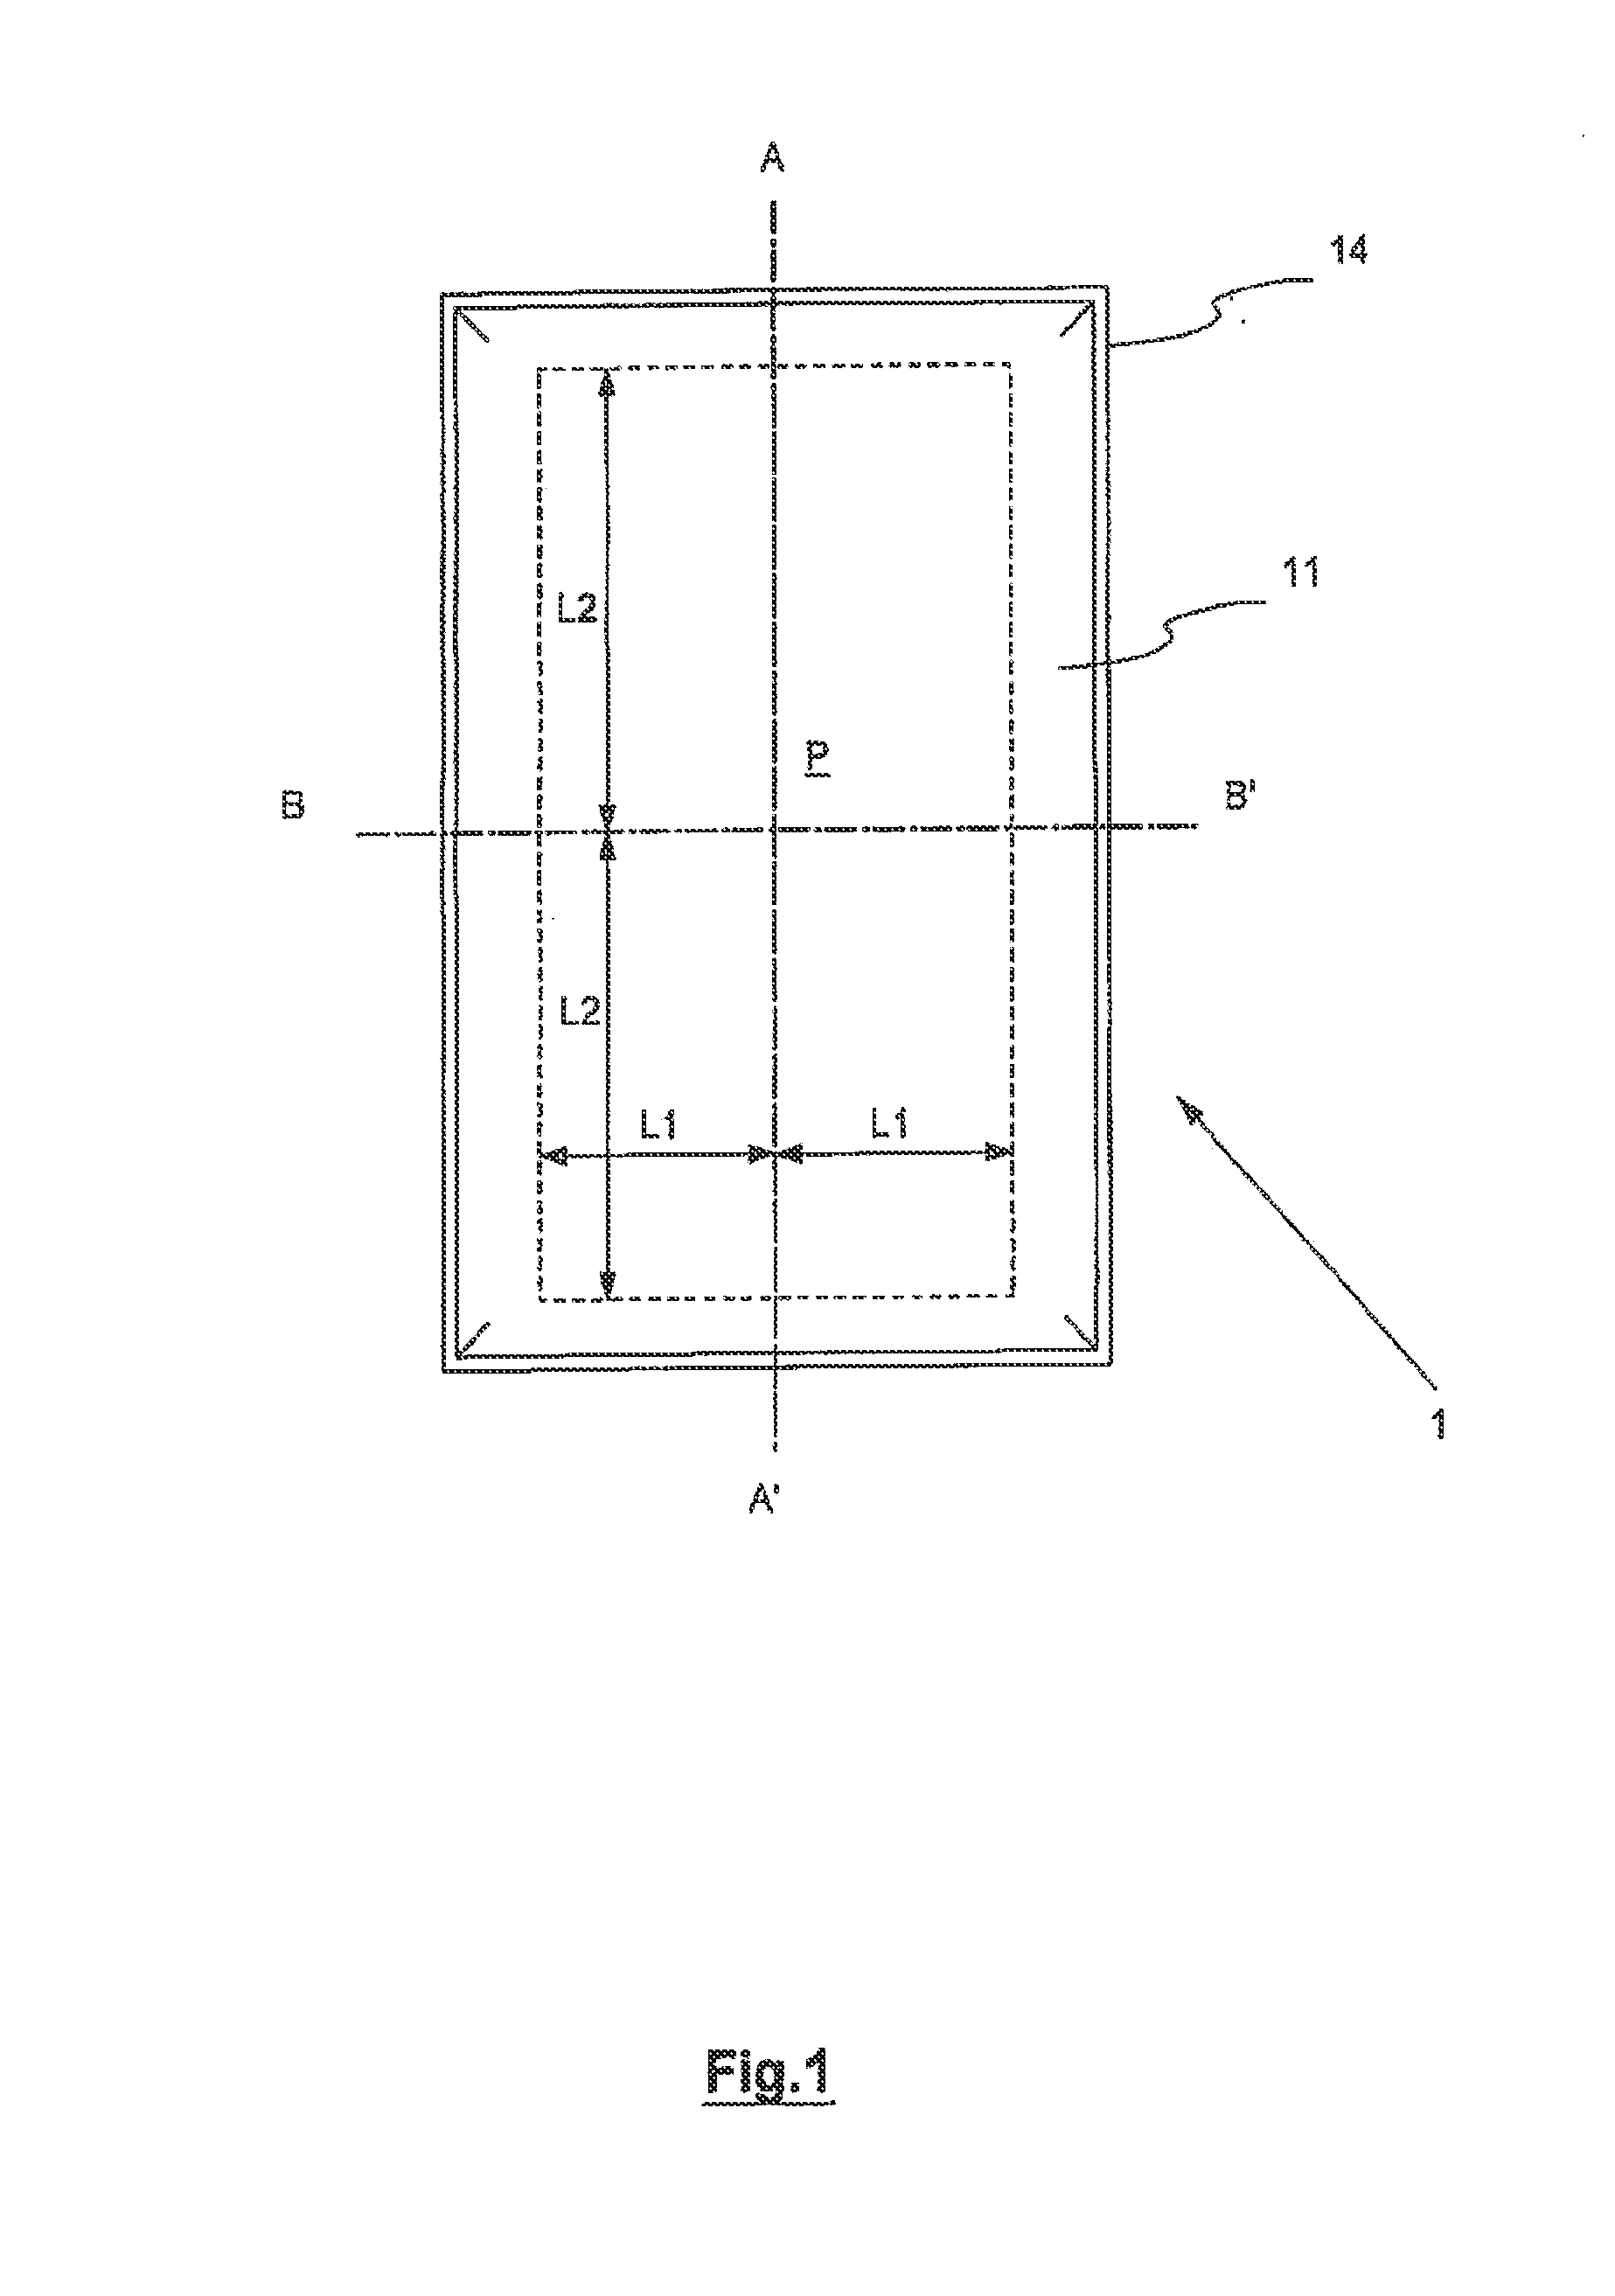 Adjustable sound-absorbing panel and assembly of adjustable sound-absorbing panels